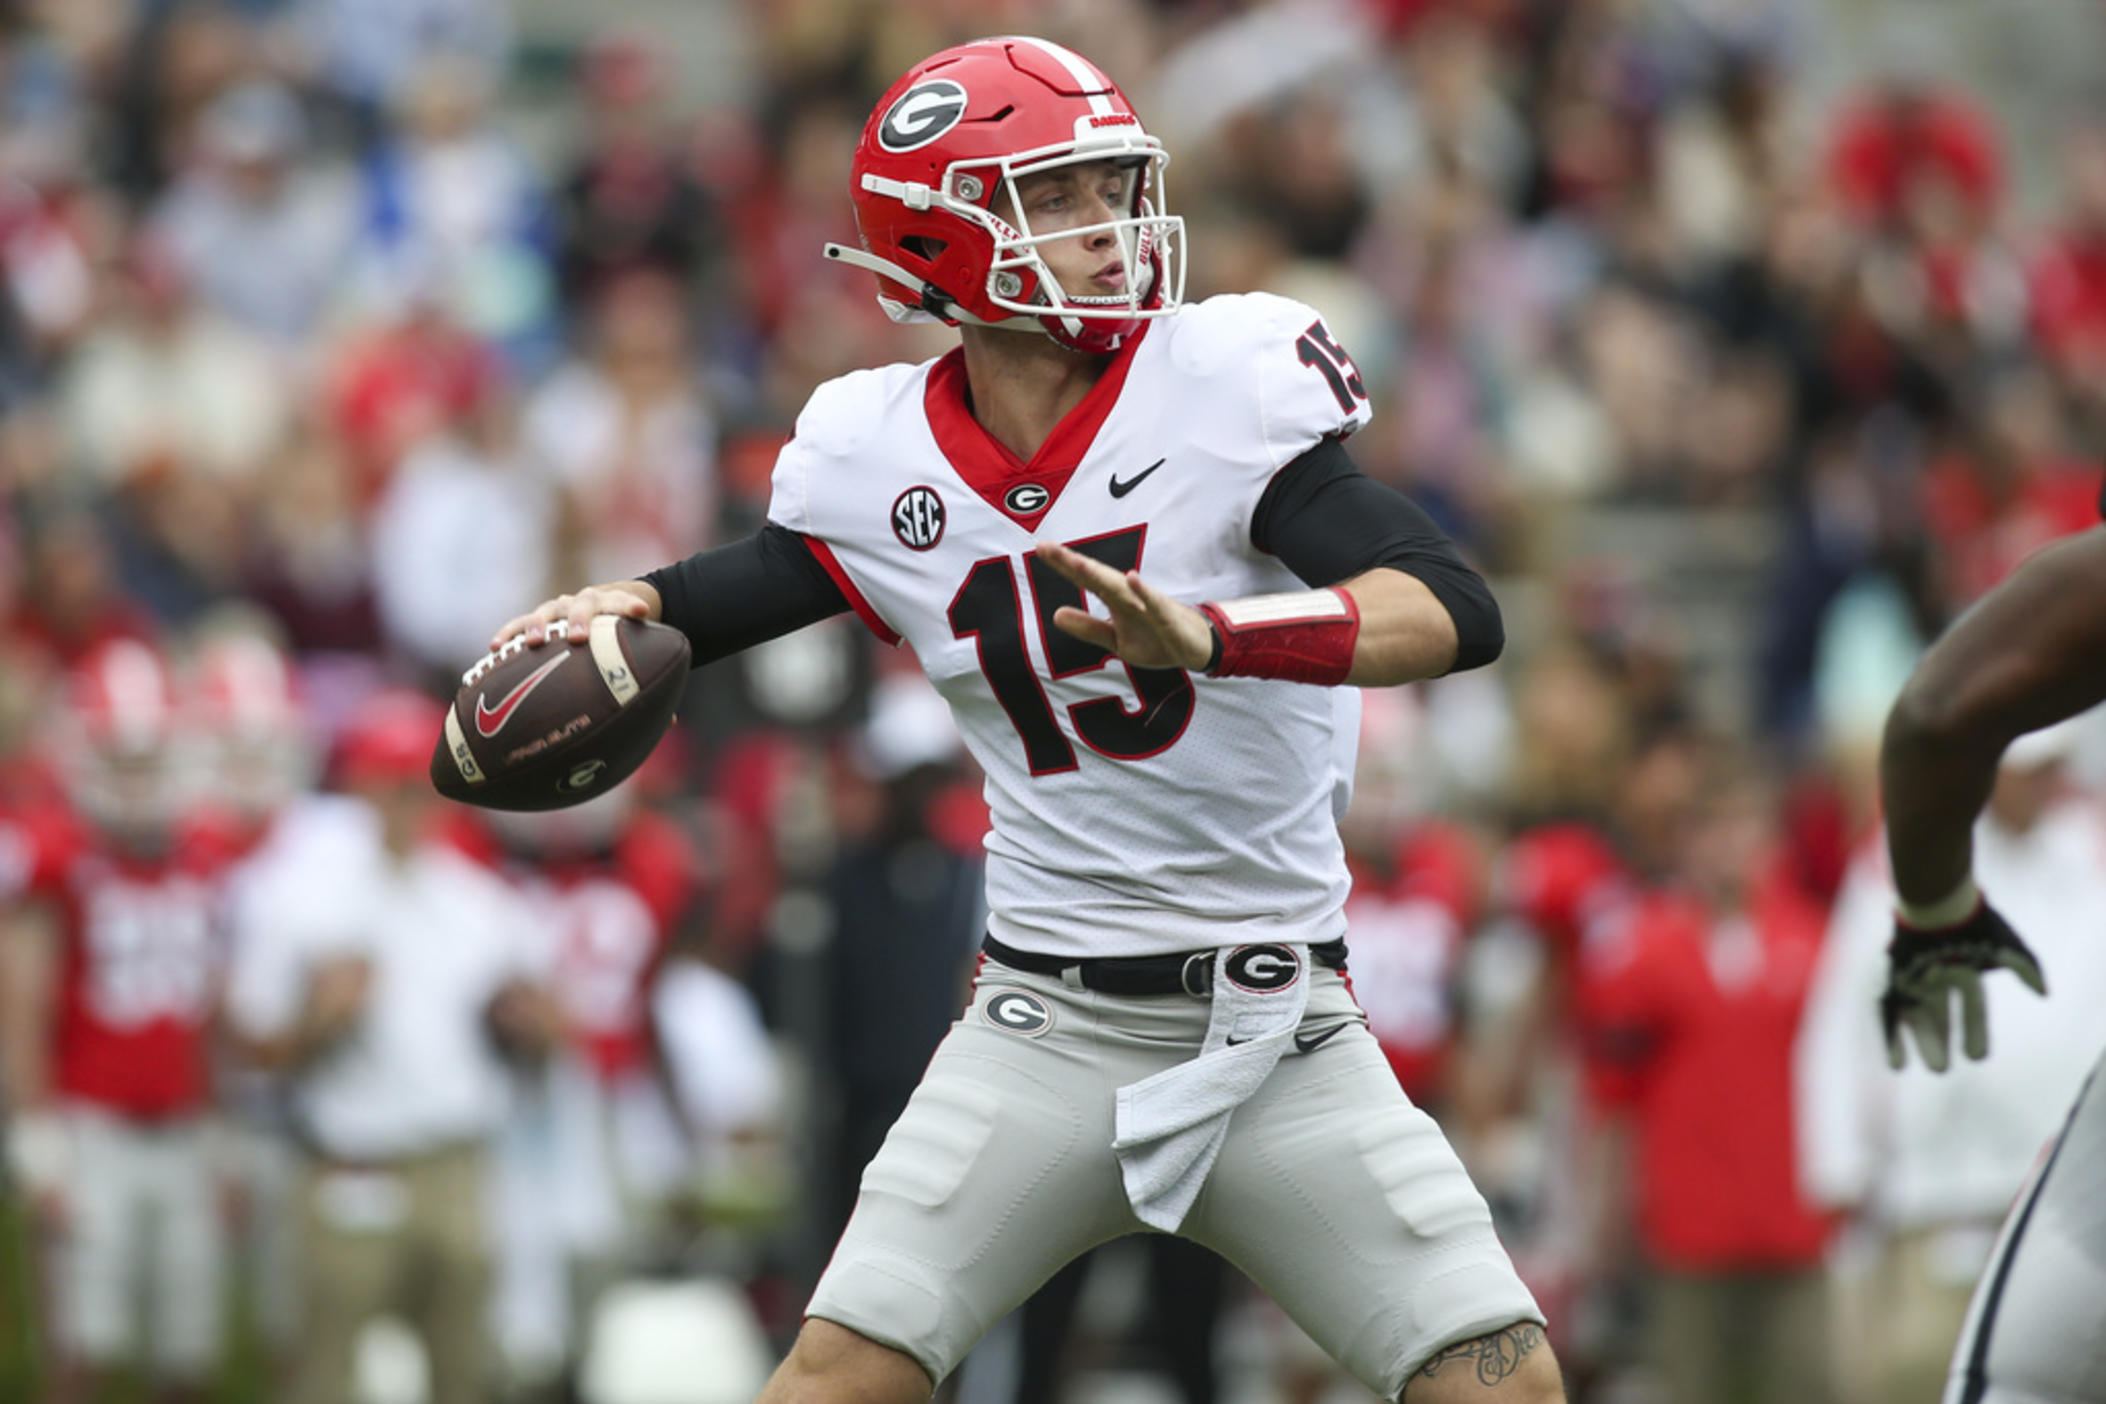 Georgia begins quest for 3rd straight championship as No. 1 in AP